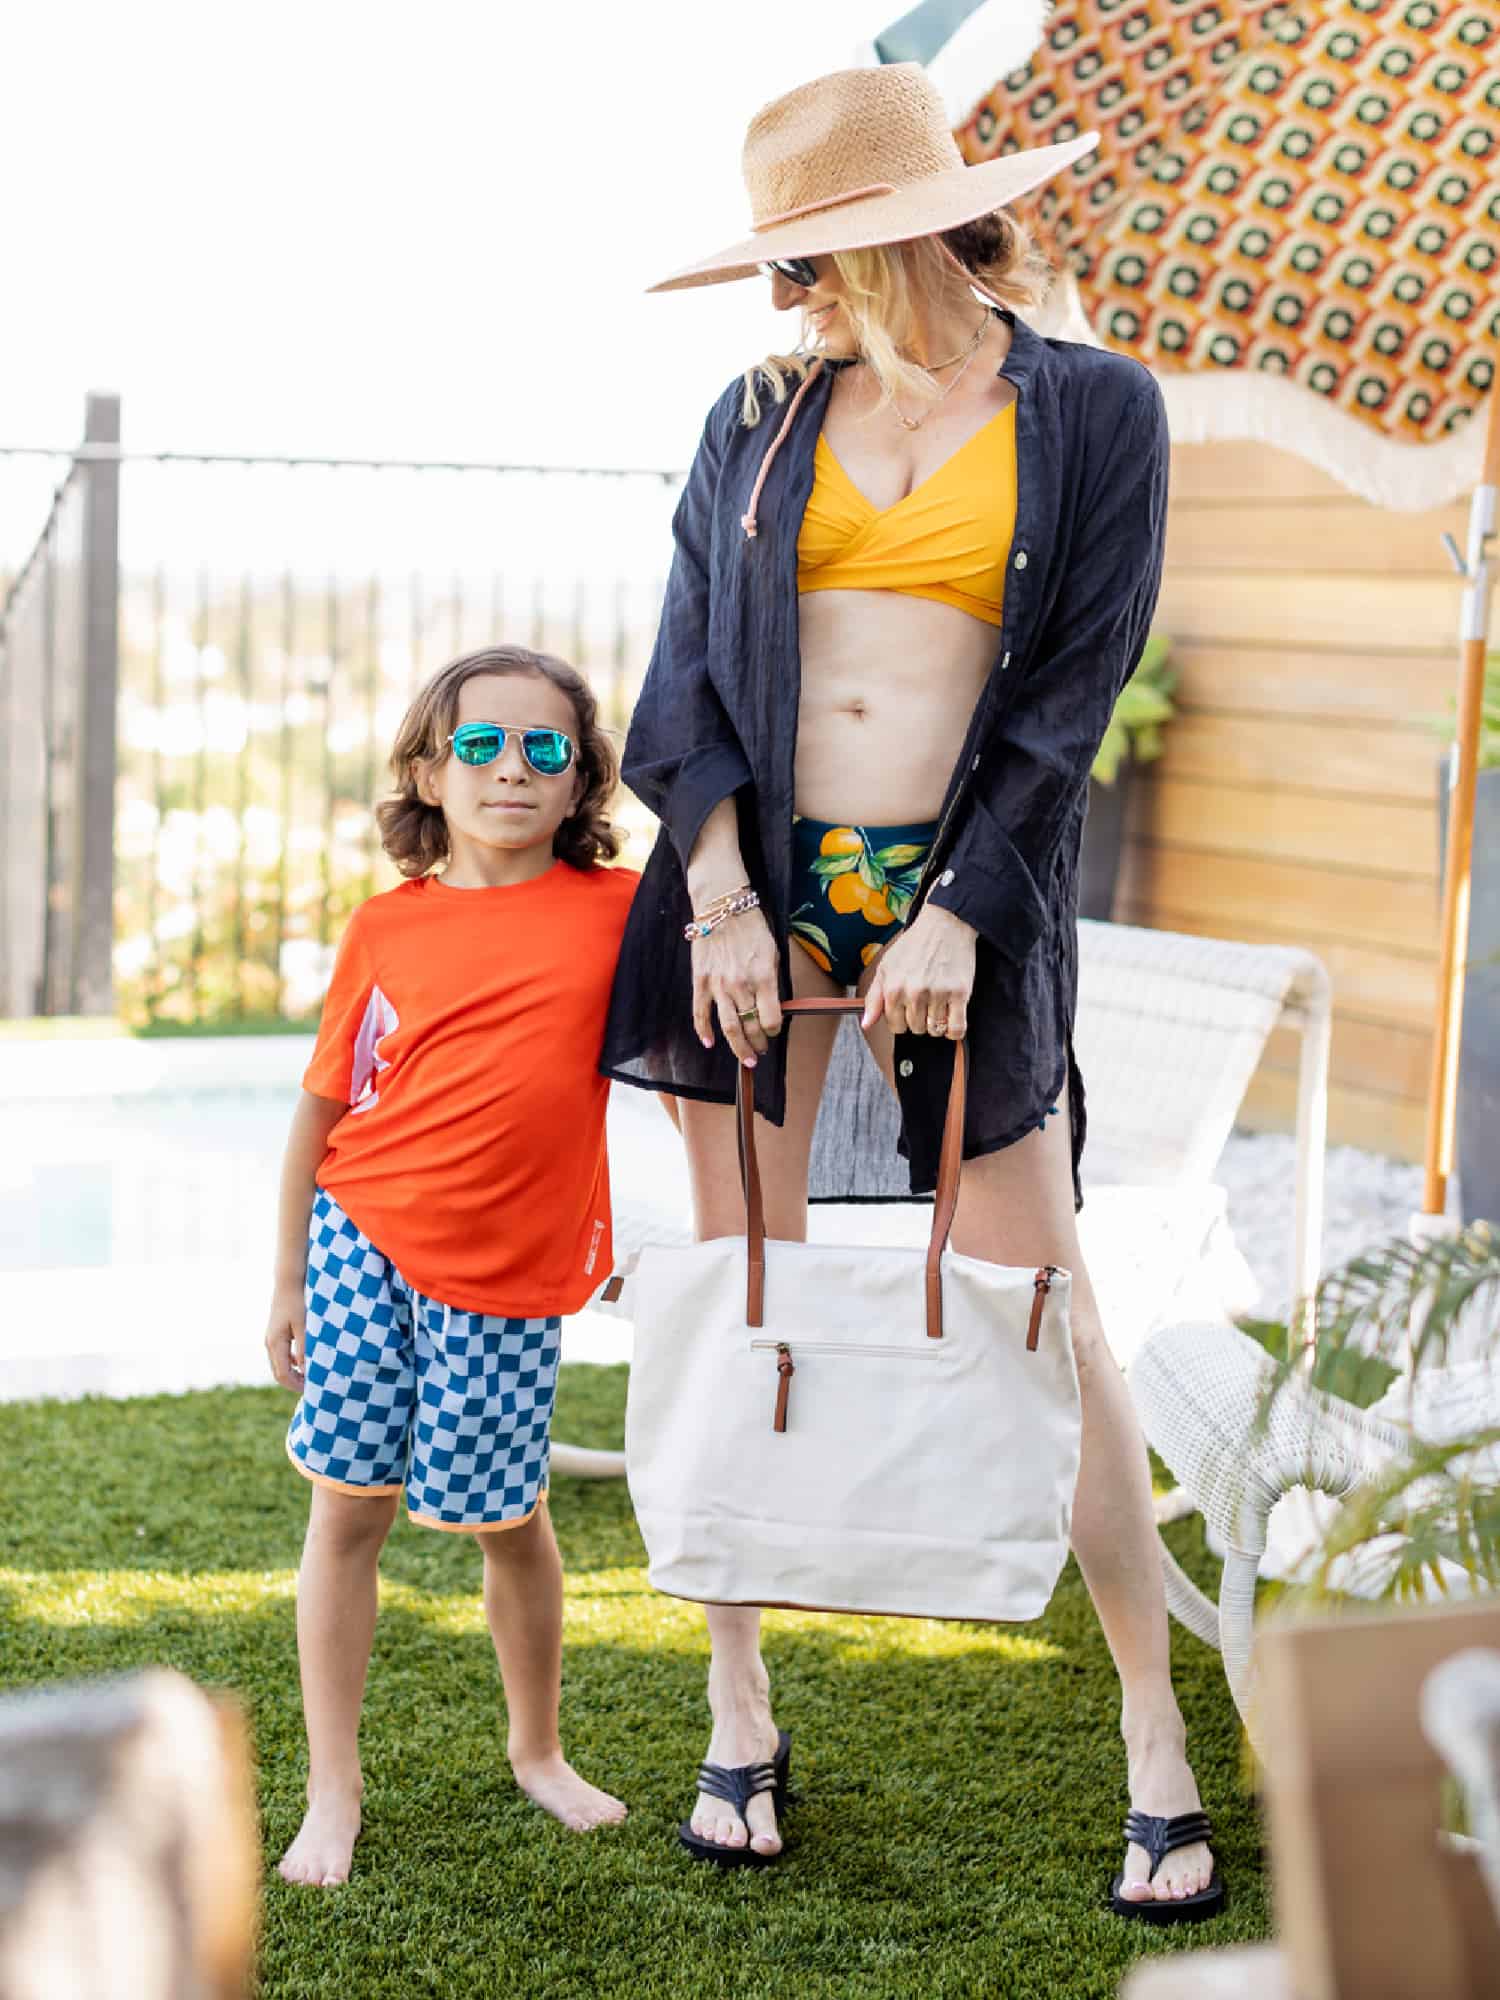 A happy mom and young son ready for a pool day. The mother is wearing a two-piece swimsuit with a bright yellow top and colorful bottom. She is accessorized with a blue long-sleeved beach cover-up, a large brimmed hat and a beach tote. The young boy is wearing colorful blue and white check swim bottoms and an orange t-shirt from KOHL'S.